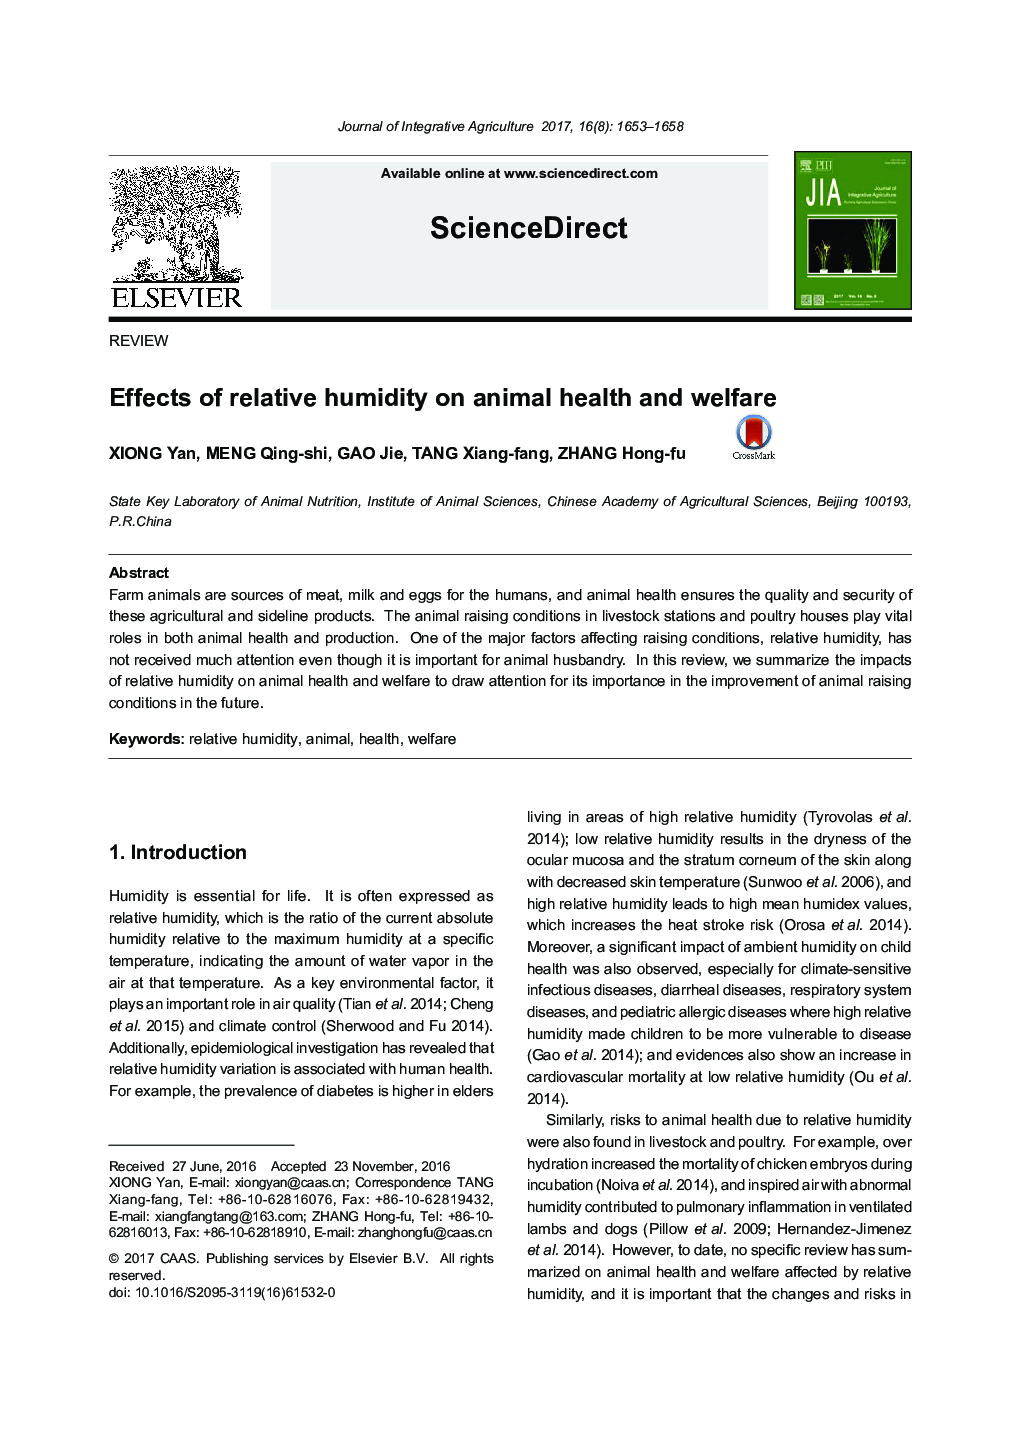 Effects of relative humidity on animal health and welfare